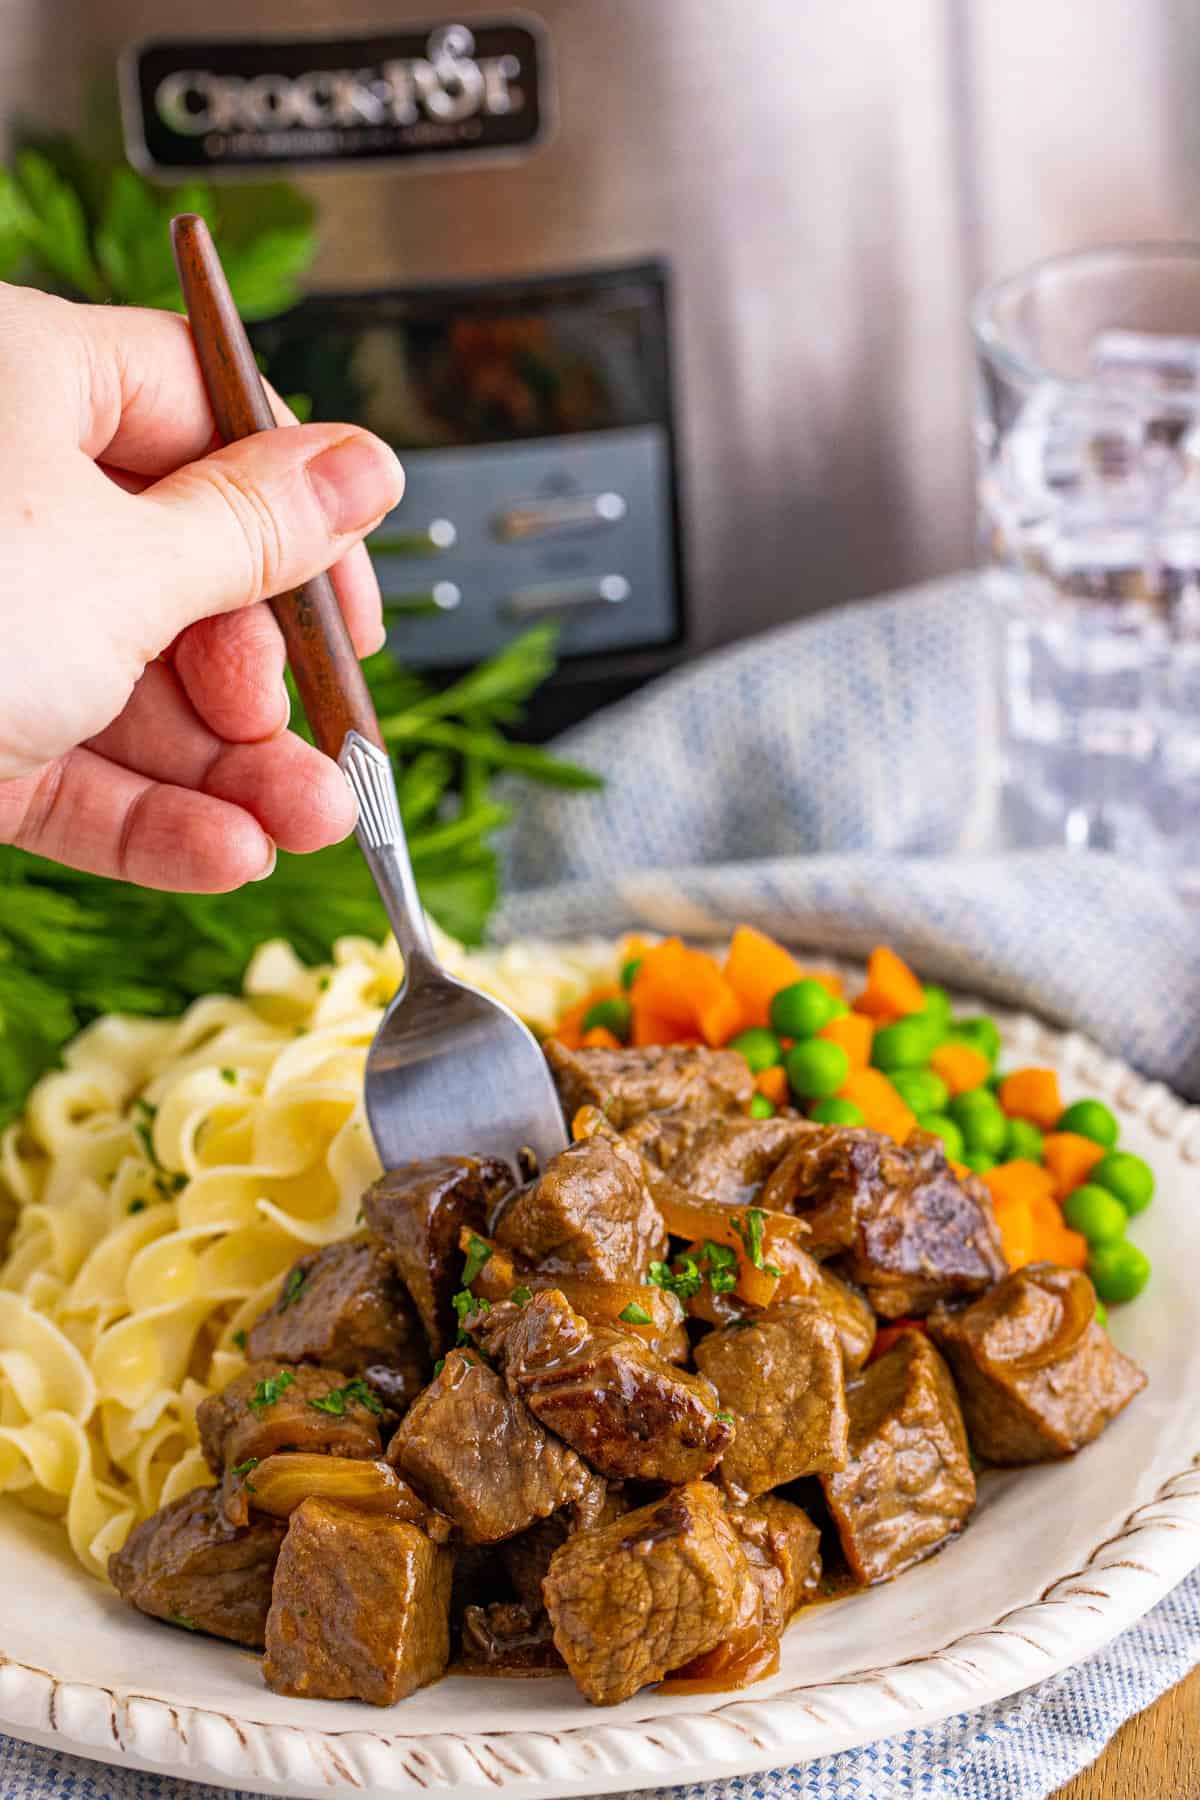 Hand with fork reaching in to take a crockpot steak bite off of plate.